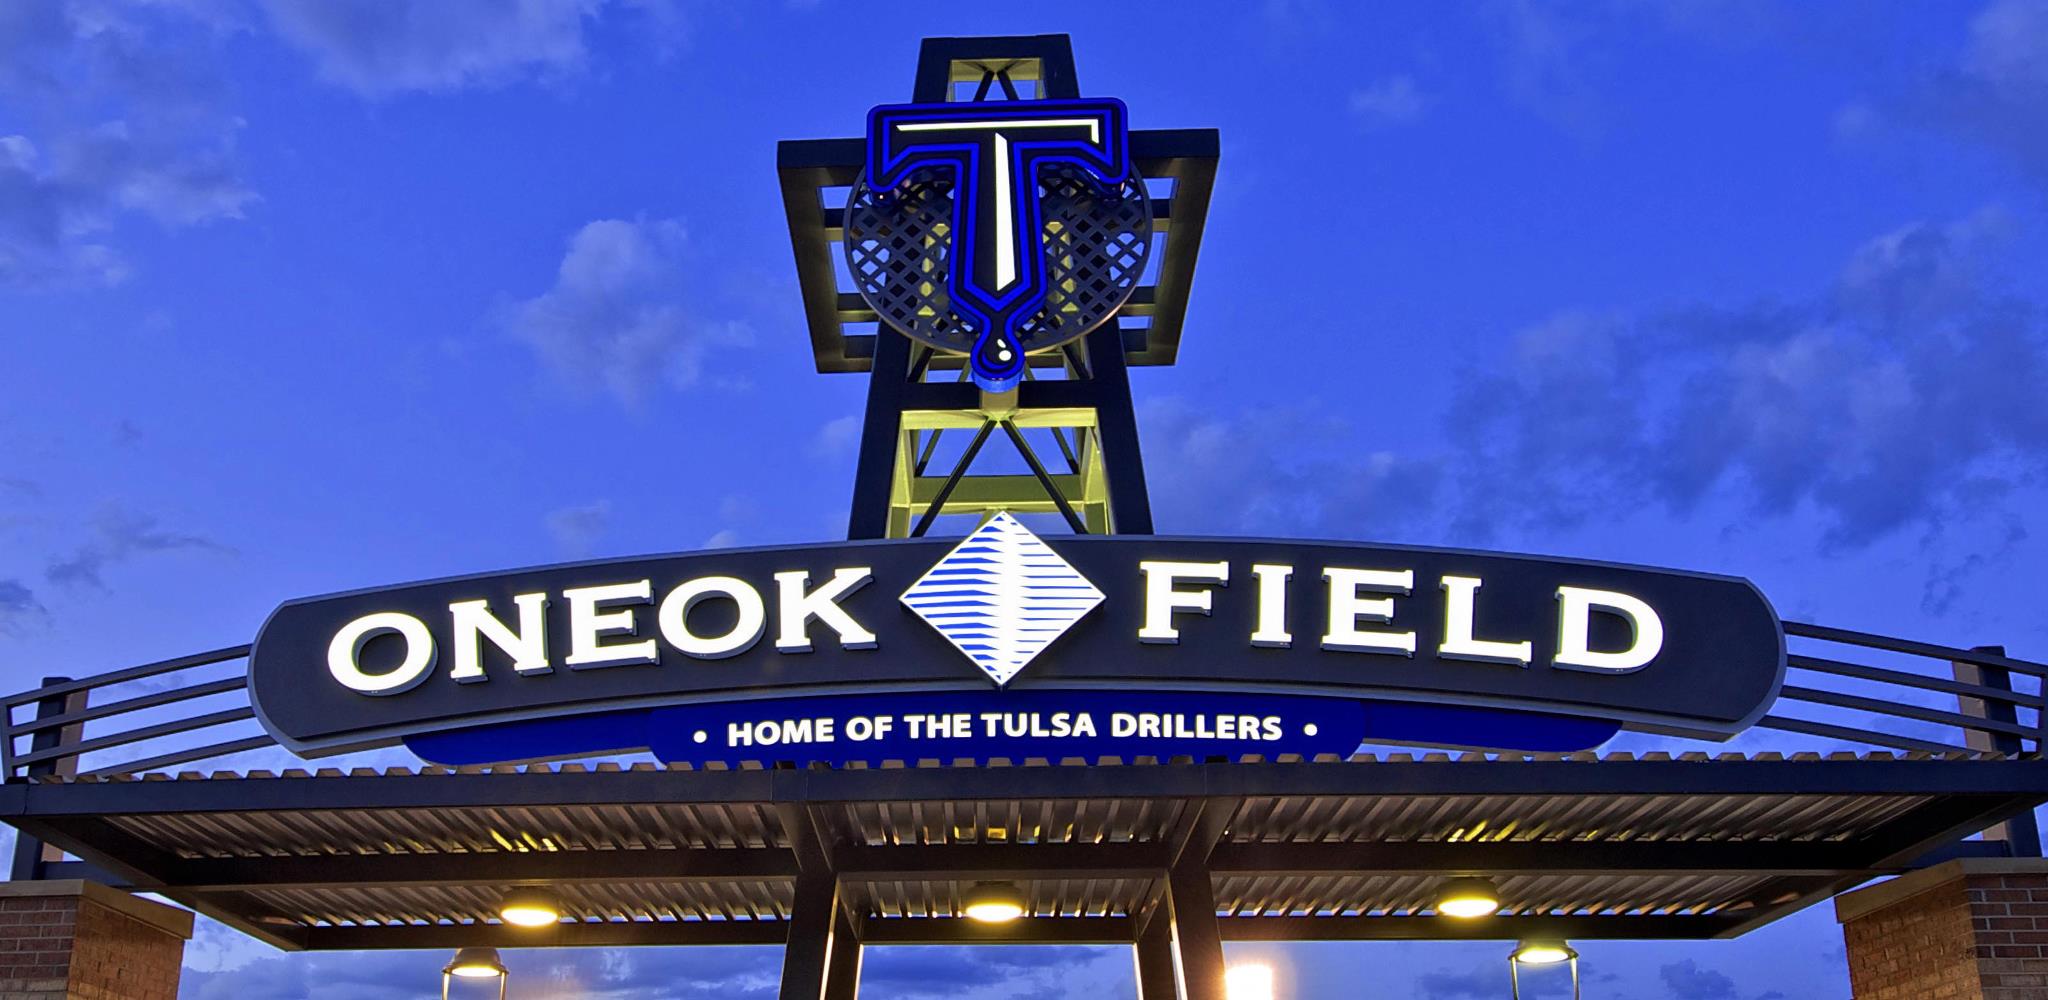 Blood Donors on June 24 to Receive 2 Tickets to Tulsa Drillers Game